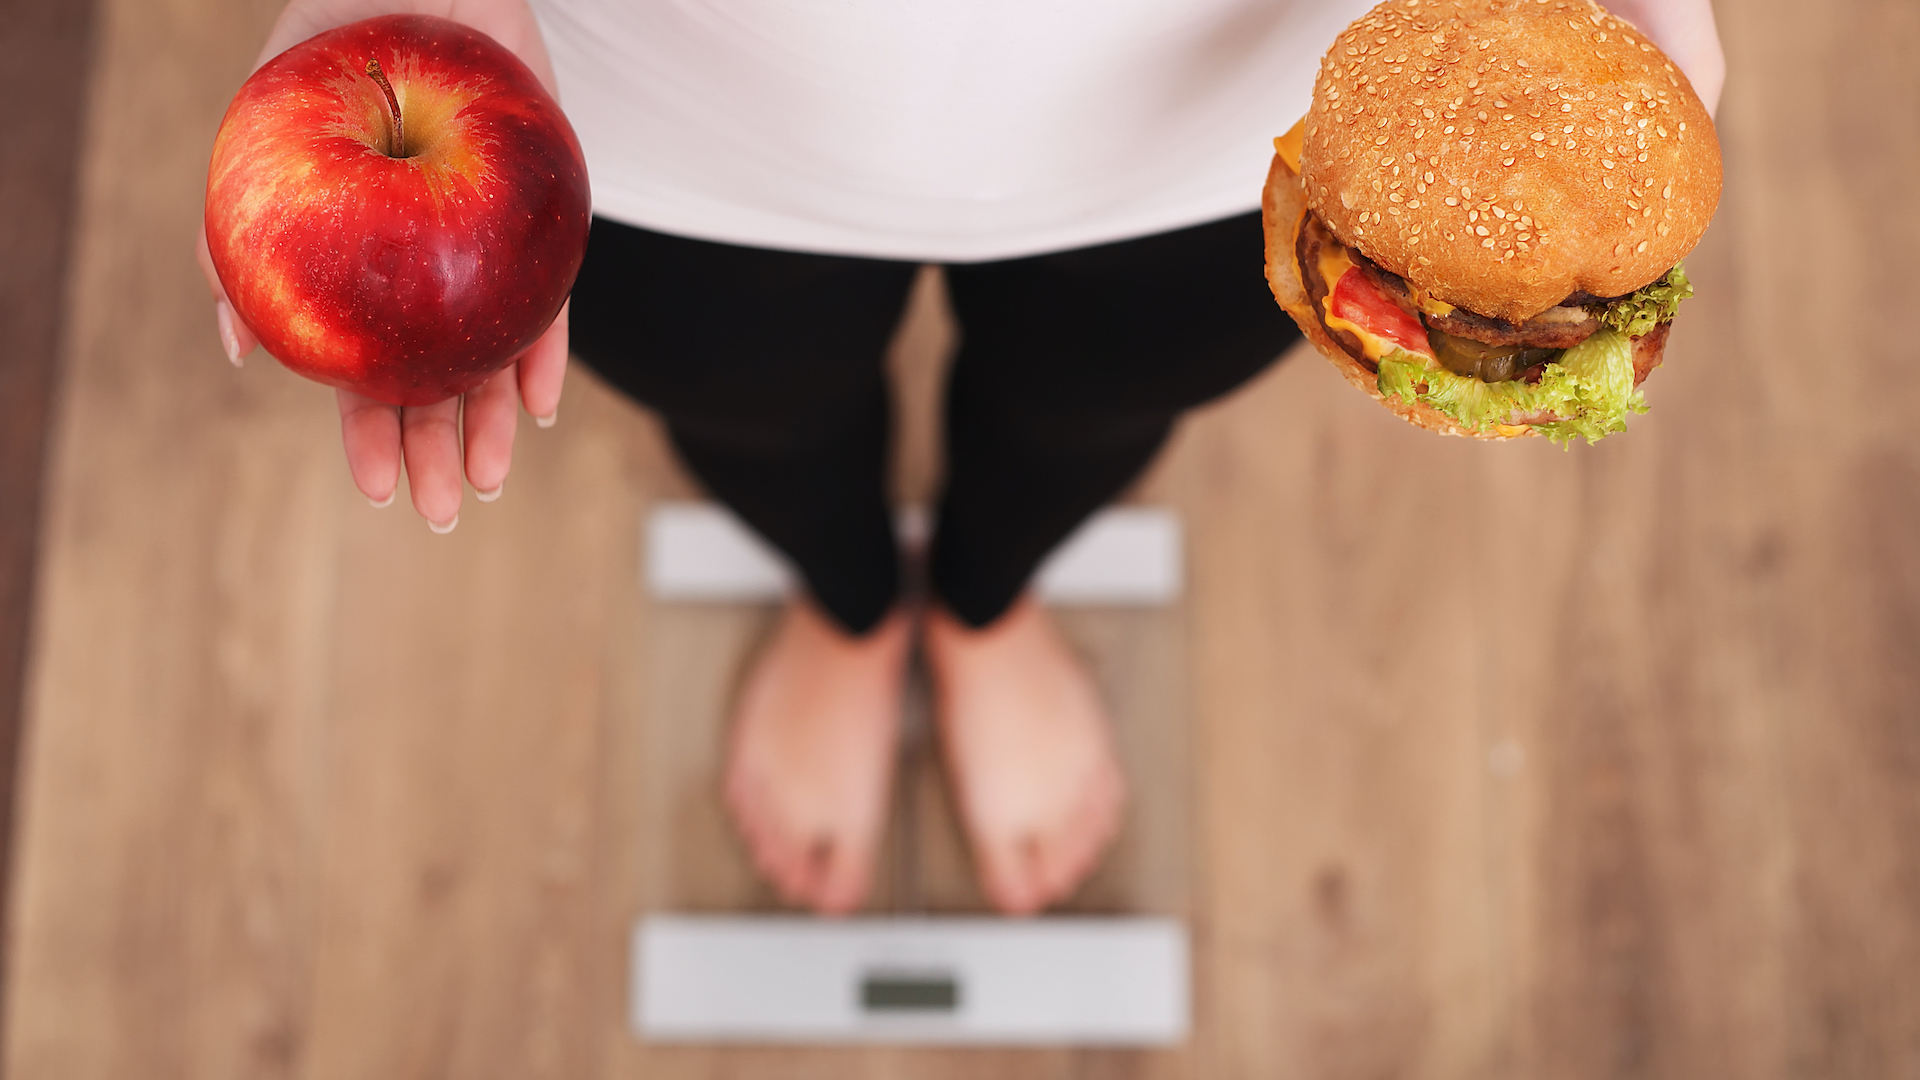 A person holding an apple and a burger on some scales